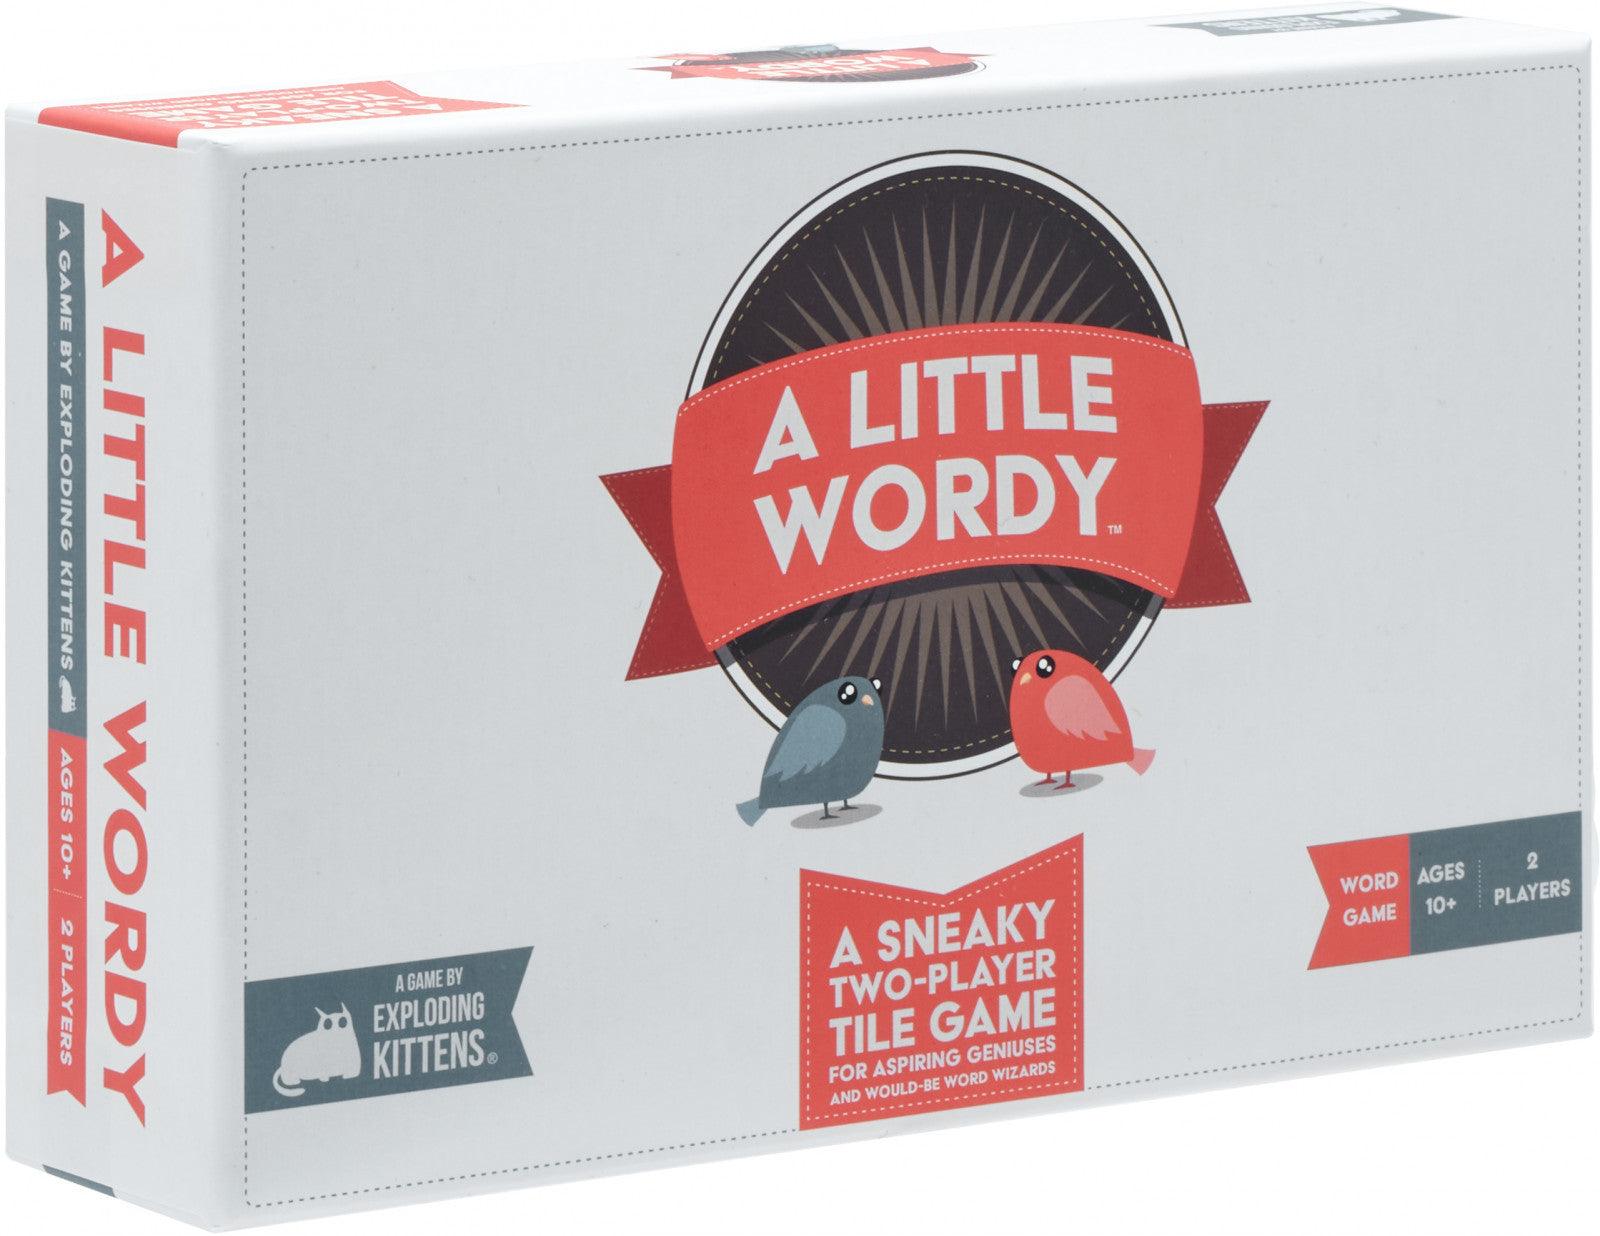 VR-89253 A Little Wordy (By Exploding Kittens) - Exploding Kittens - Titan Pop Culture